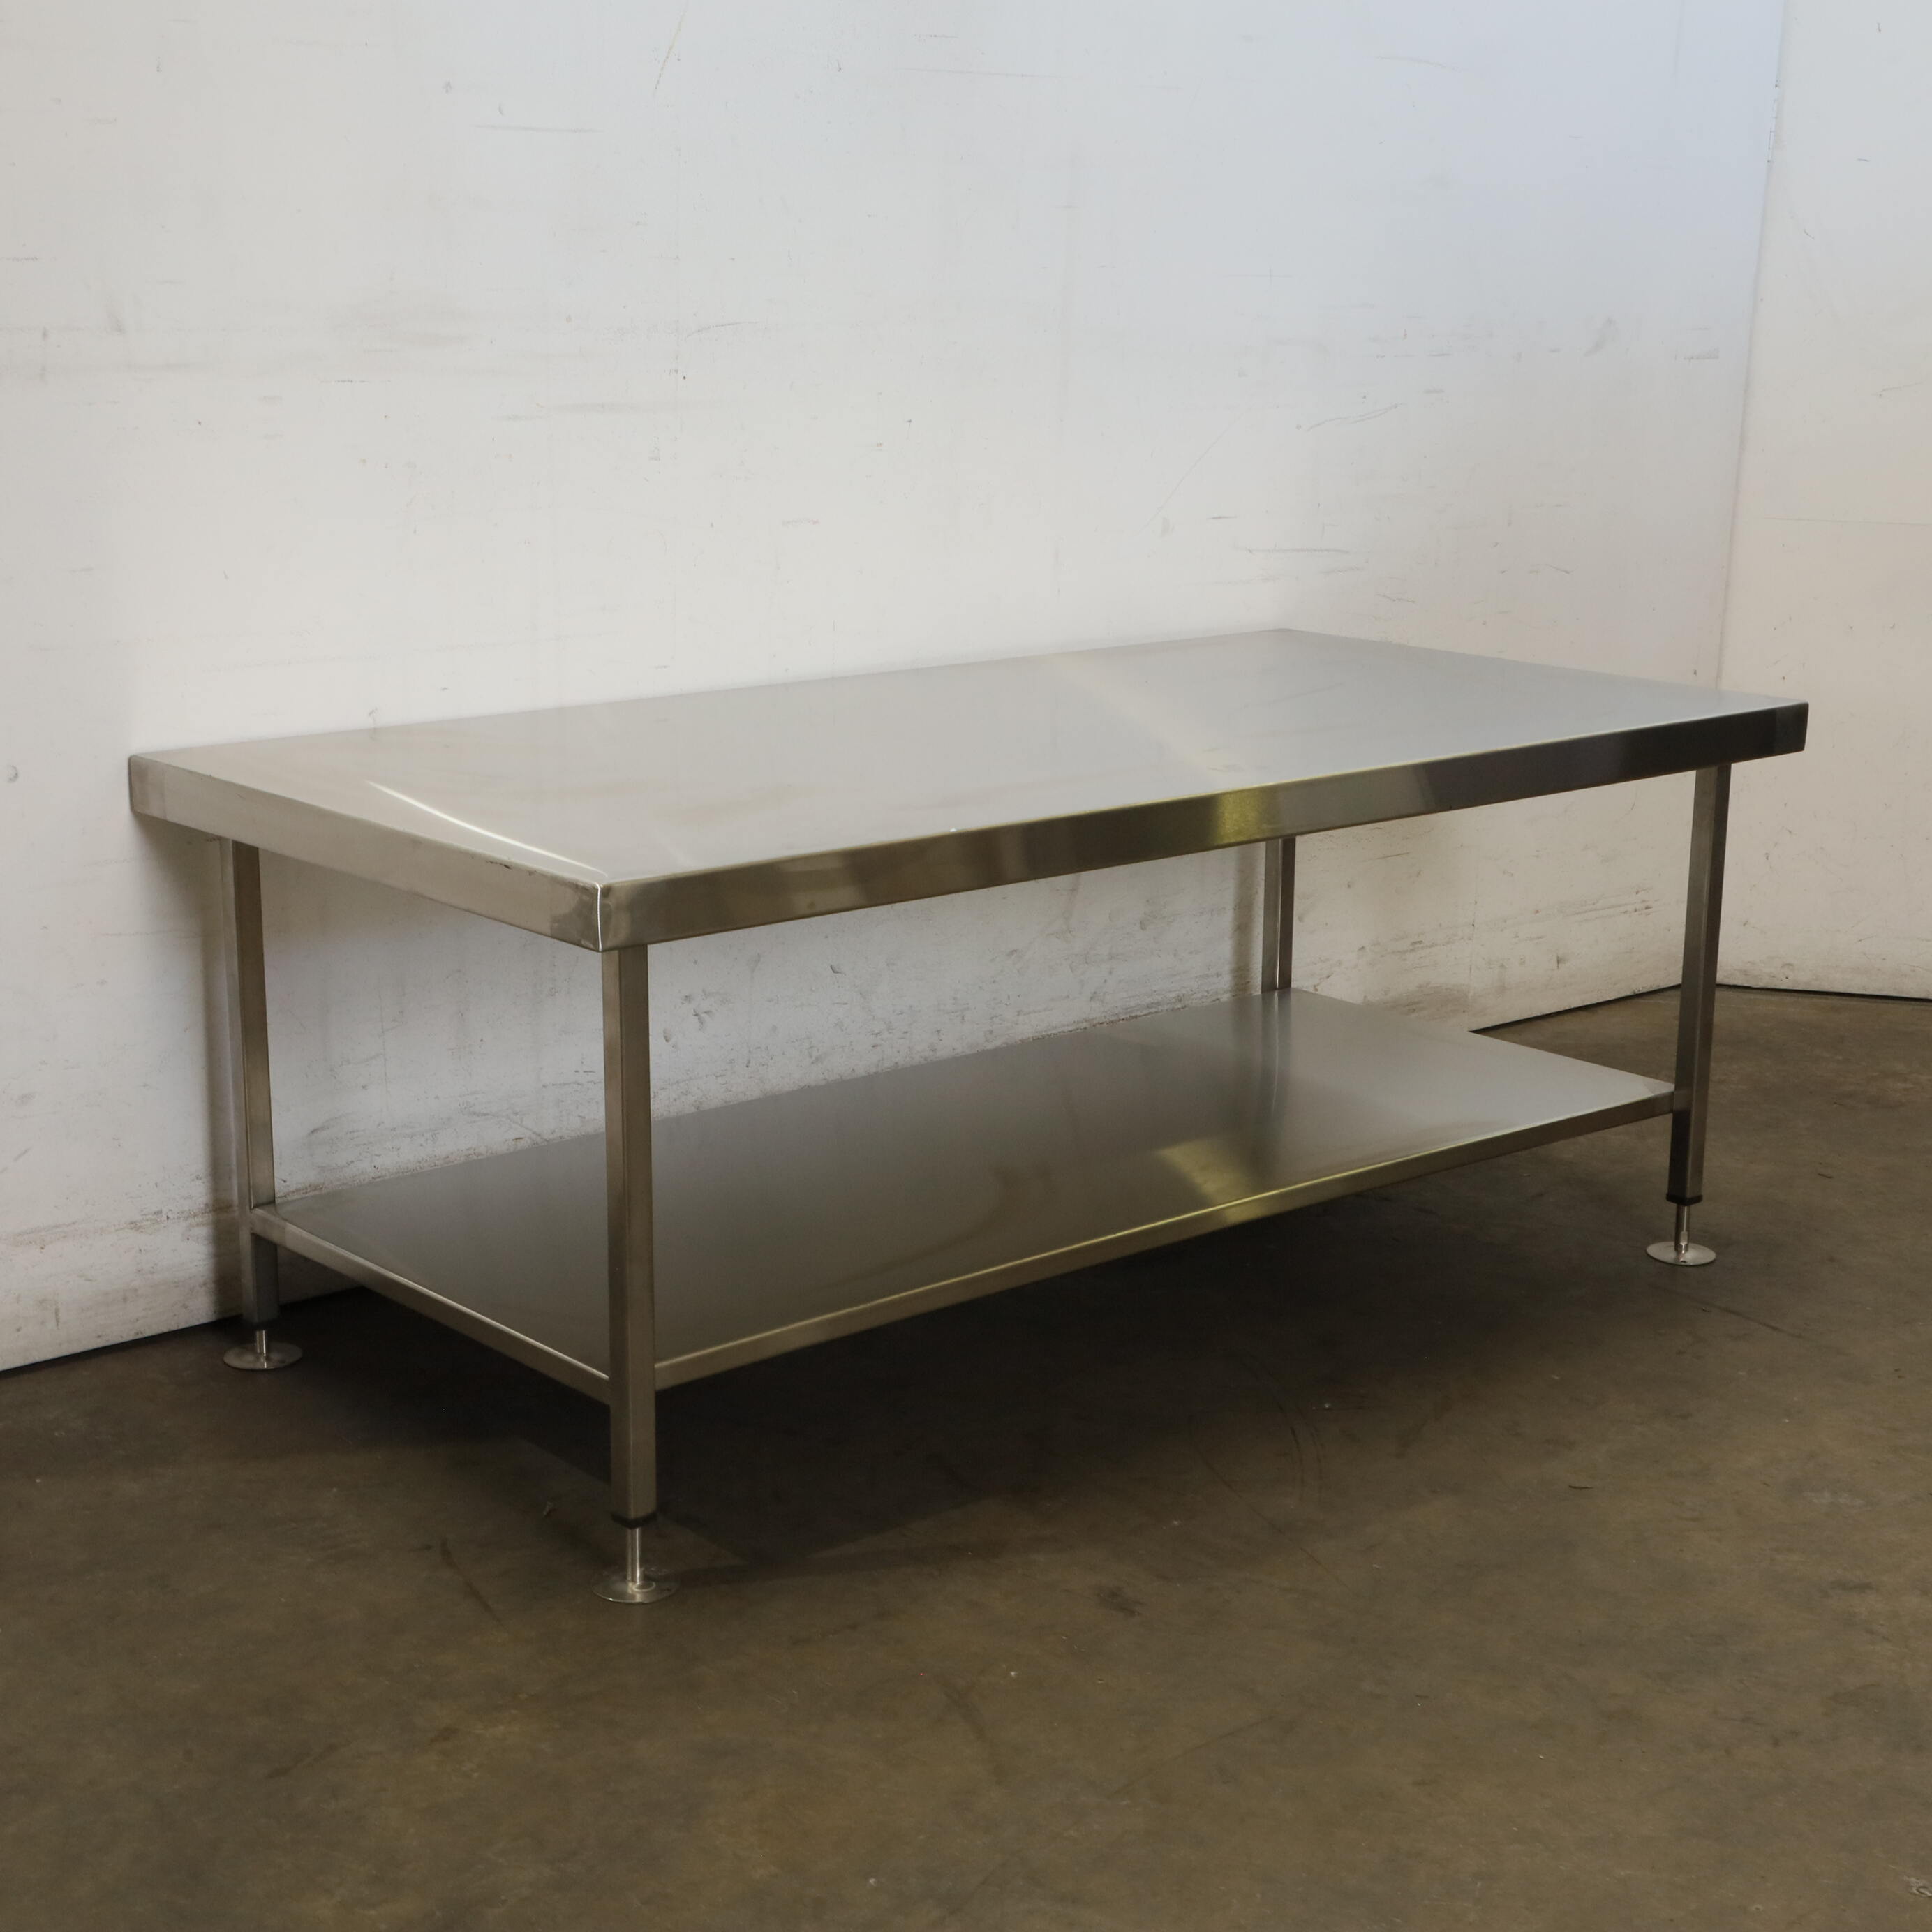 Thumbnail - Stainless Steel Bench 1400 x 700